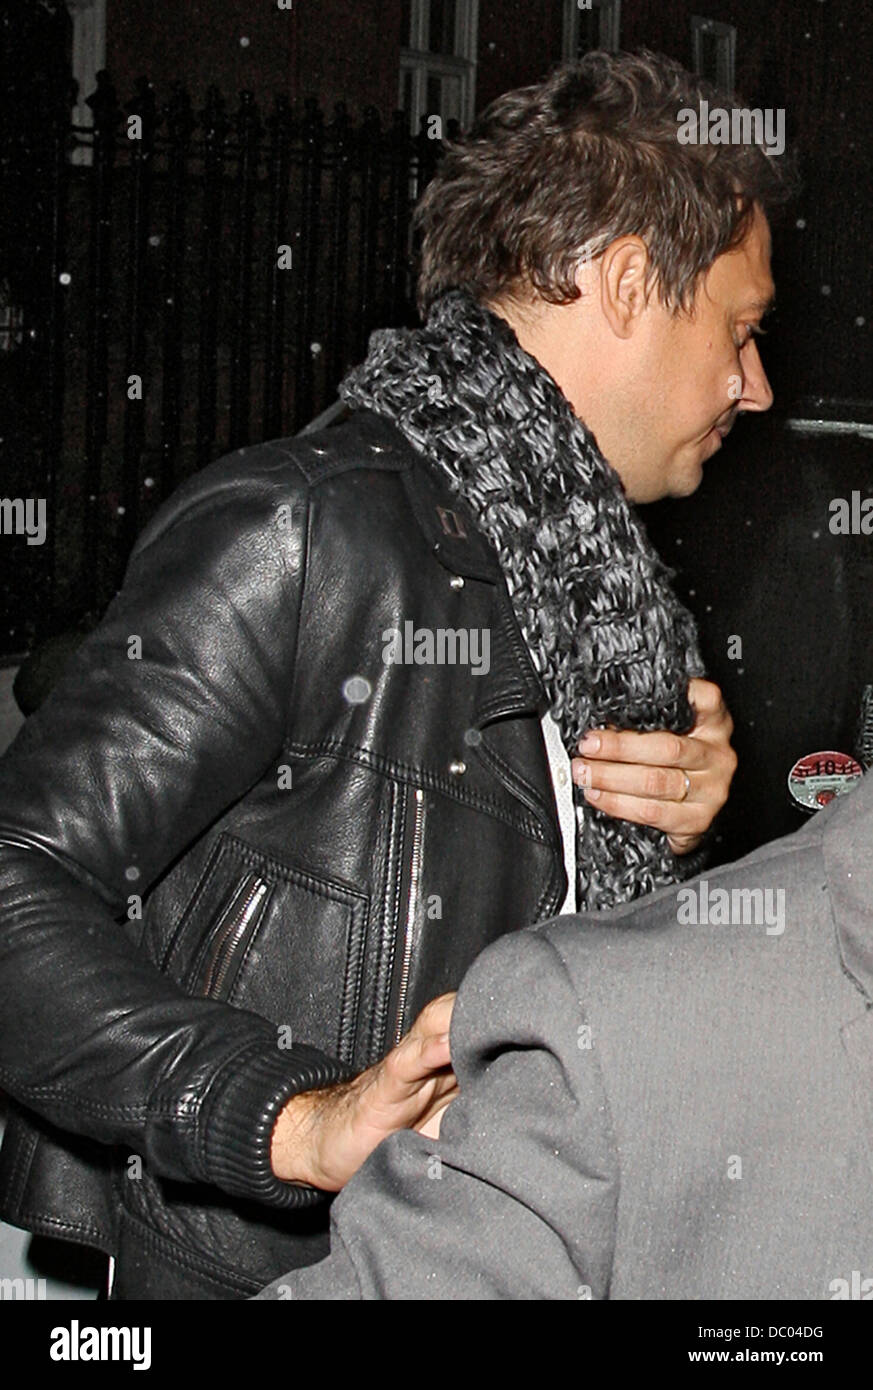 Kate Moss and Jamie Hince leaving Claridge's in Mayfair, Kate was in no mood to be photographed and rushed to her car. London, England - 21.09.11 Stock Photo